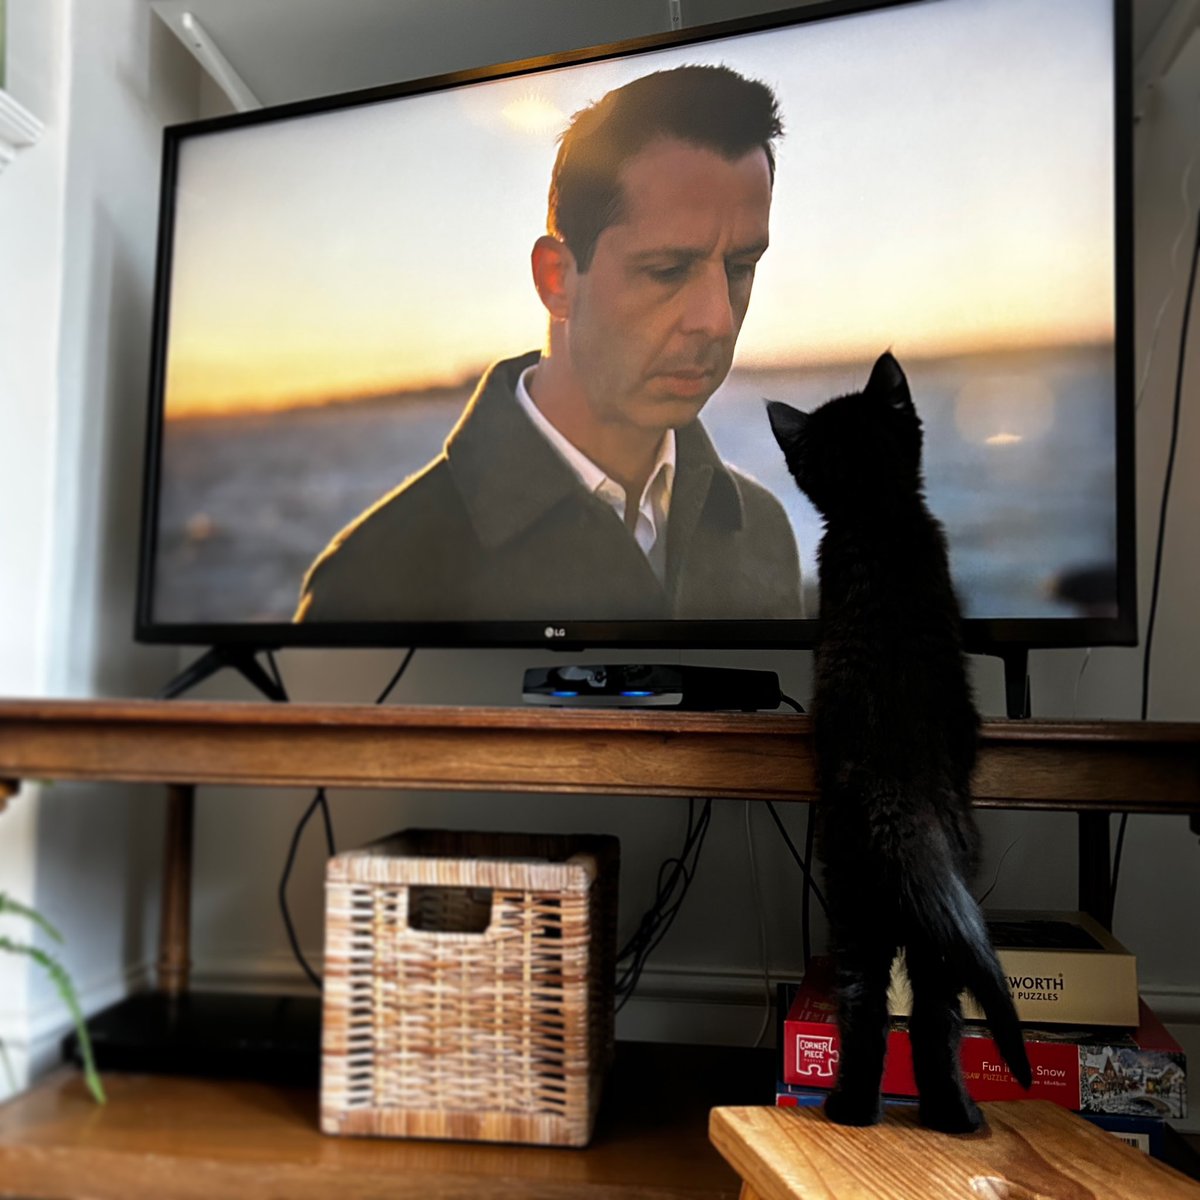 Bruce loved the #Succession finale. @succession 
#HBO #jeremystrong #teamkendall